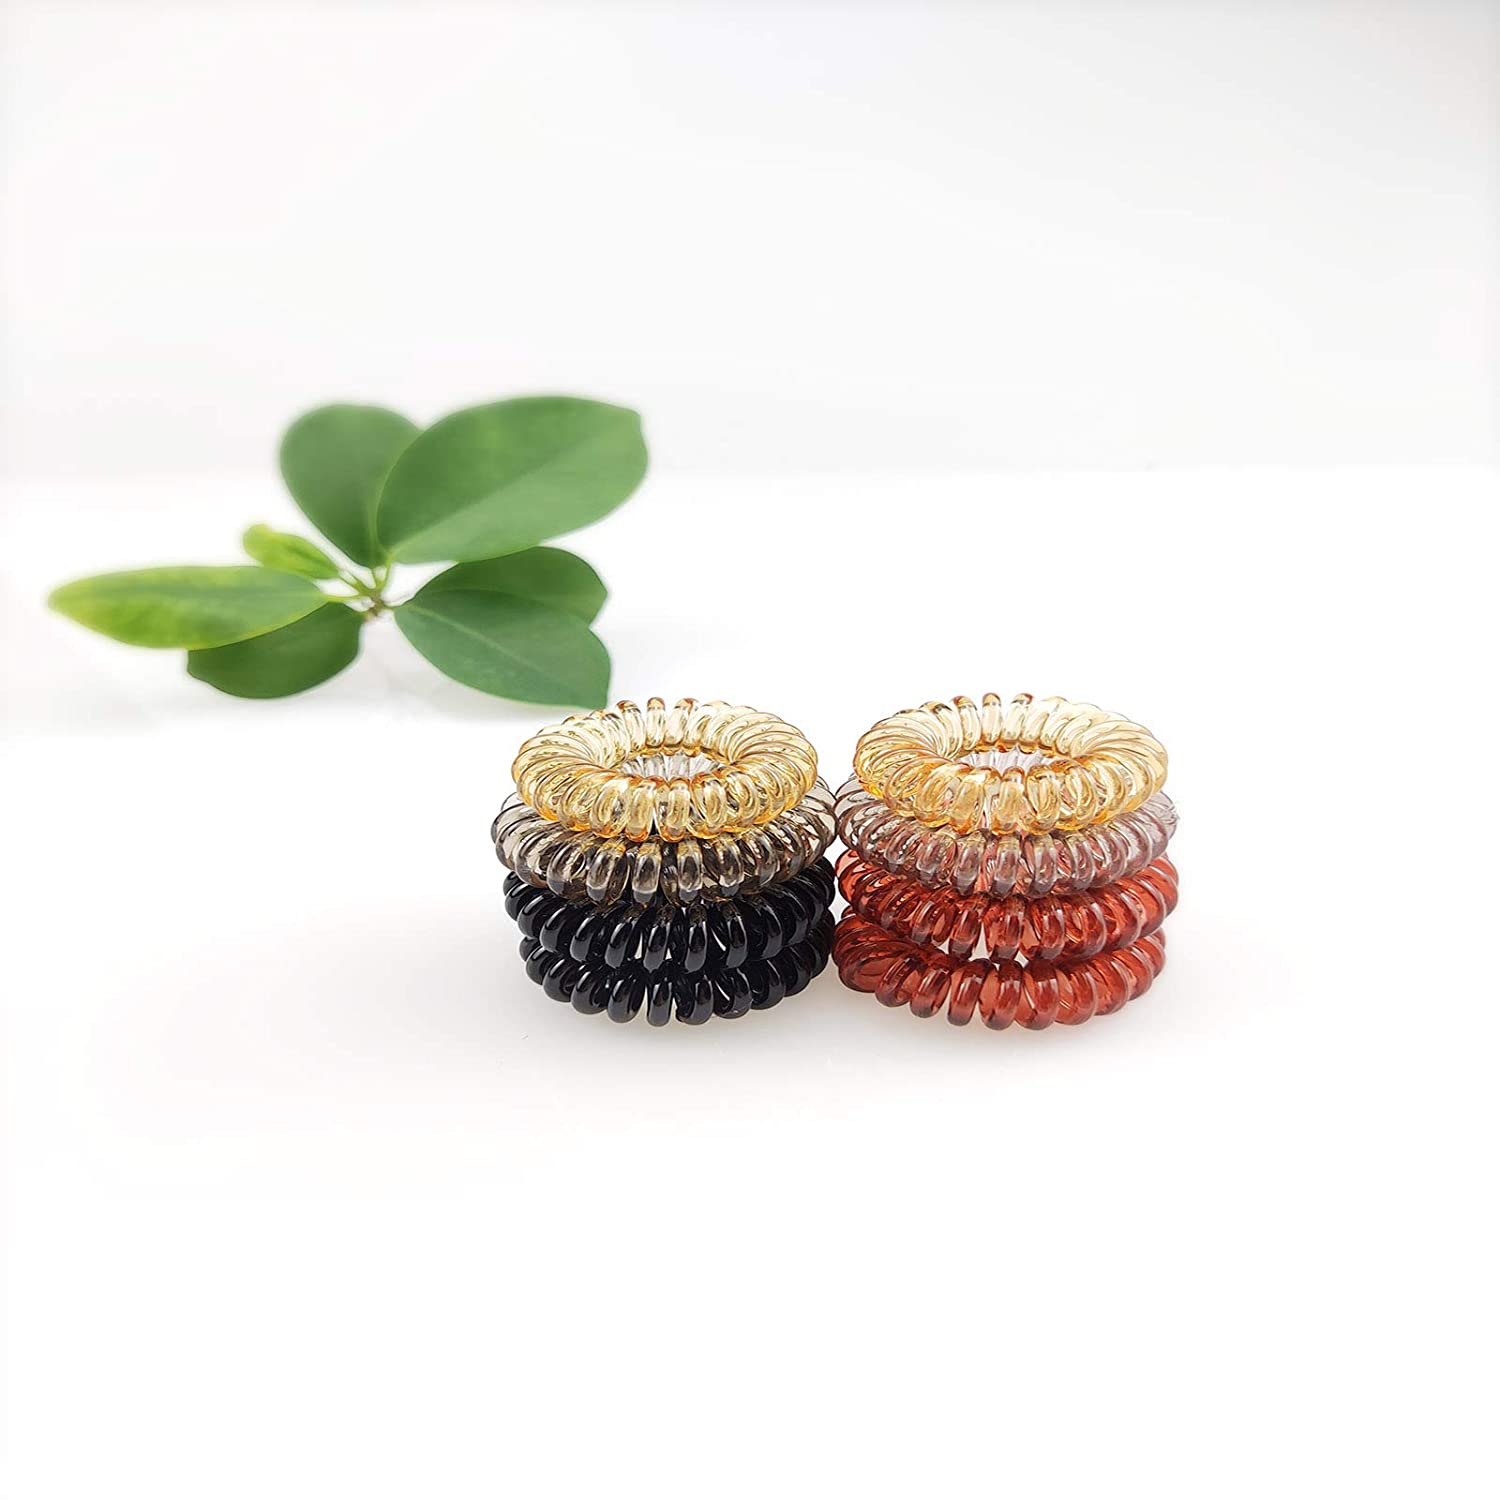 Spiral Hair Ties (8 Pieces), Coil Hair Ties for Thick Hair, Ponytail Holder Hair Ties for Women (four Colors), No Crease Hair Ties, Phone Cord Hair Ties for all Hair Types with Plastic Spiral. - image 2 of 7